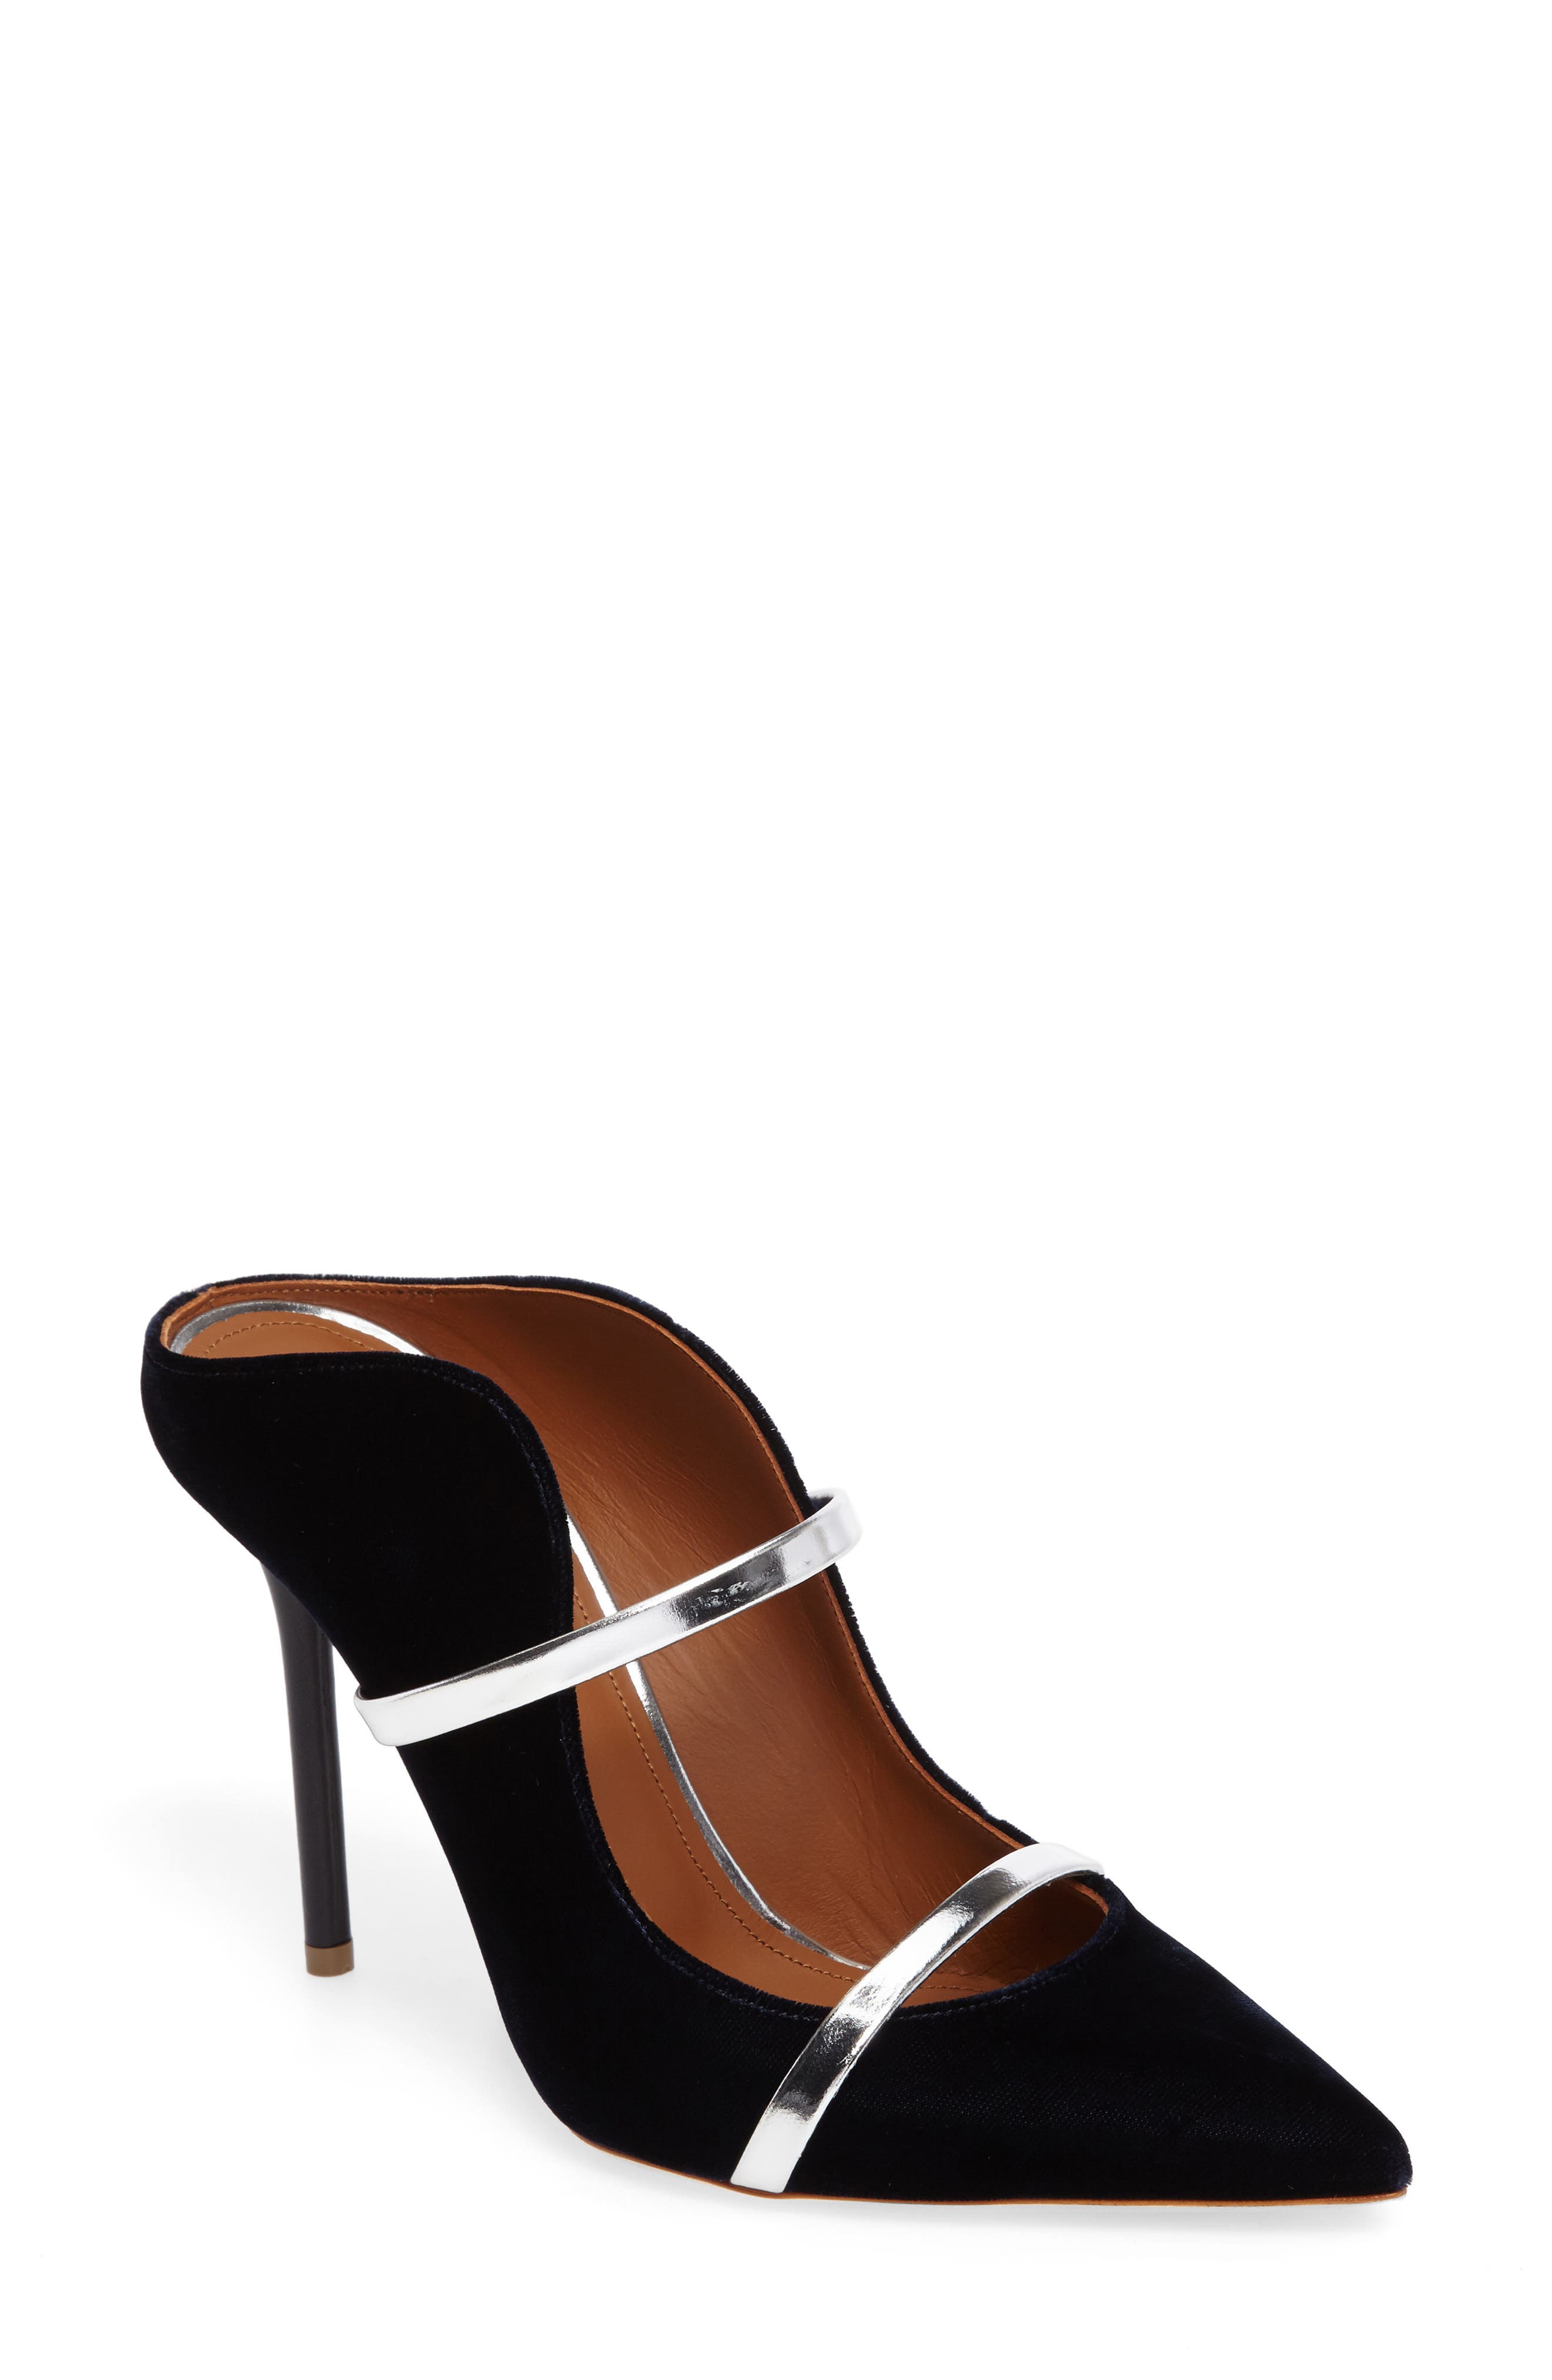 nordstrom malone souliers